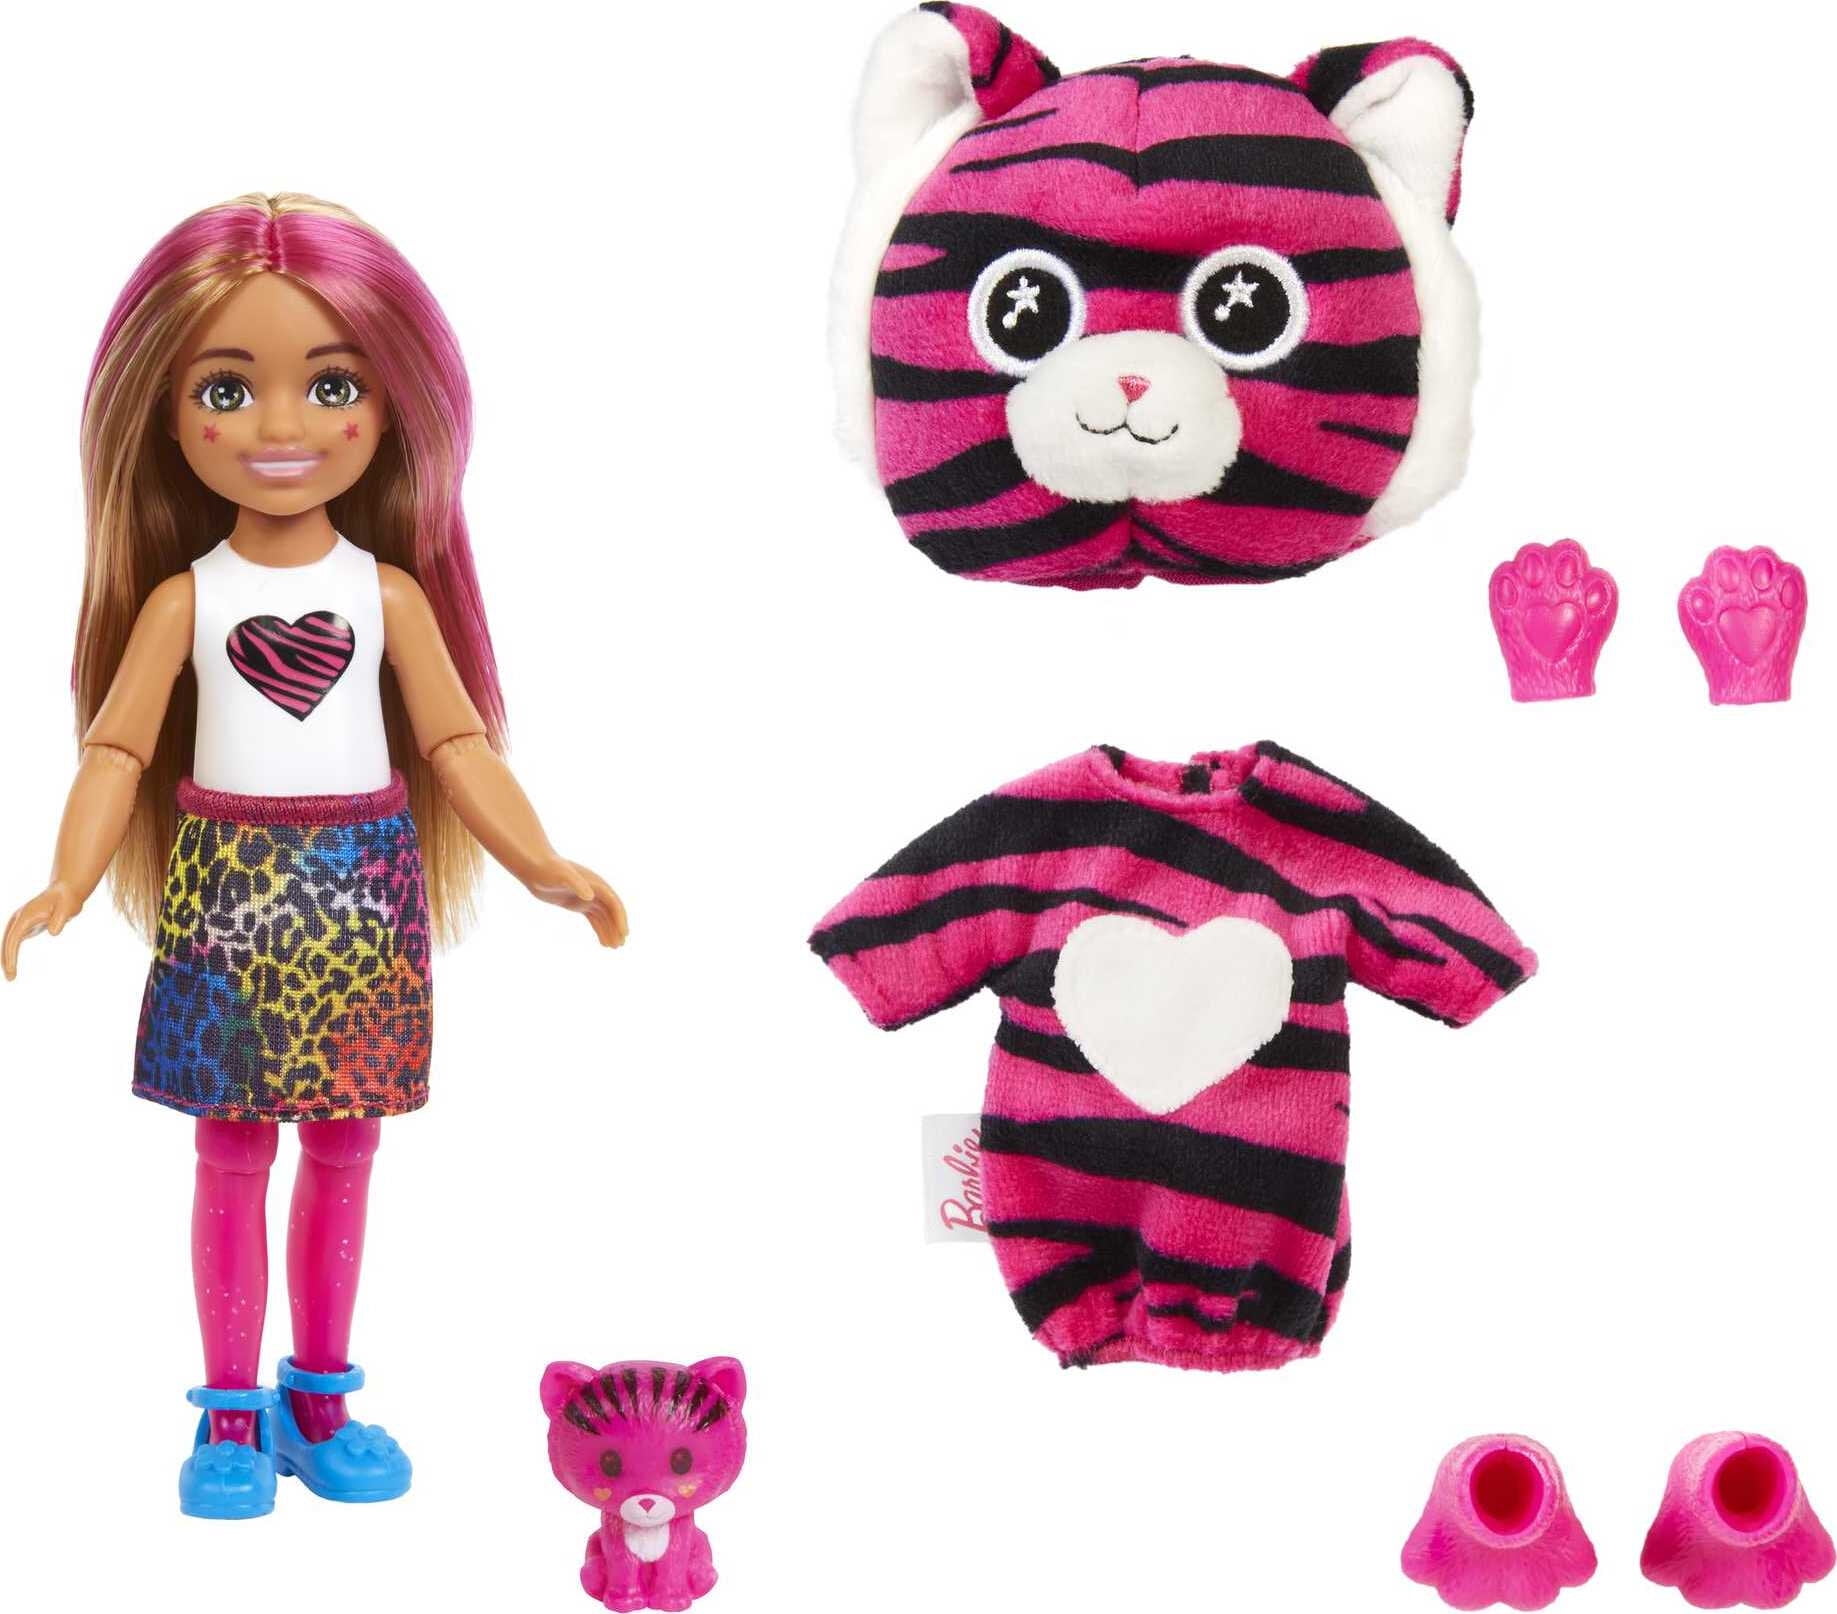 Buy wholesale Mattel - ref: HKP99 - Barbie - Jungle Series Cutie Reveal  Doll with plush tiger costume.